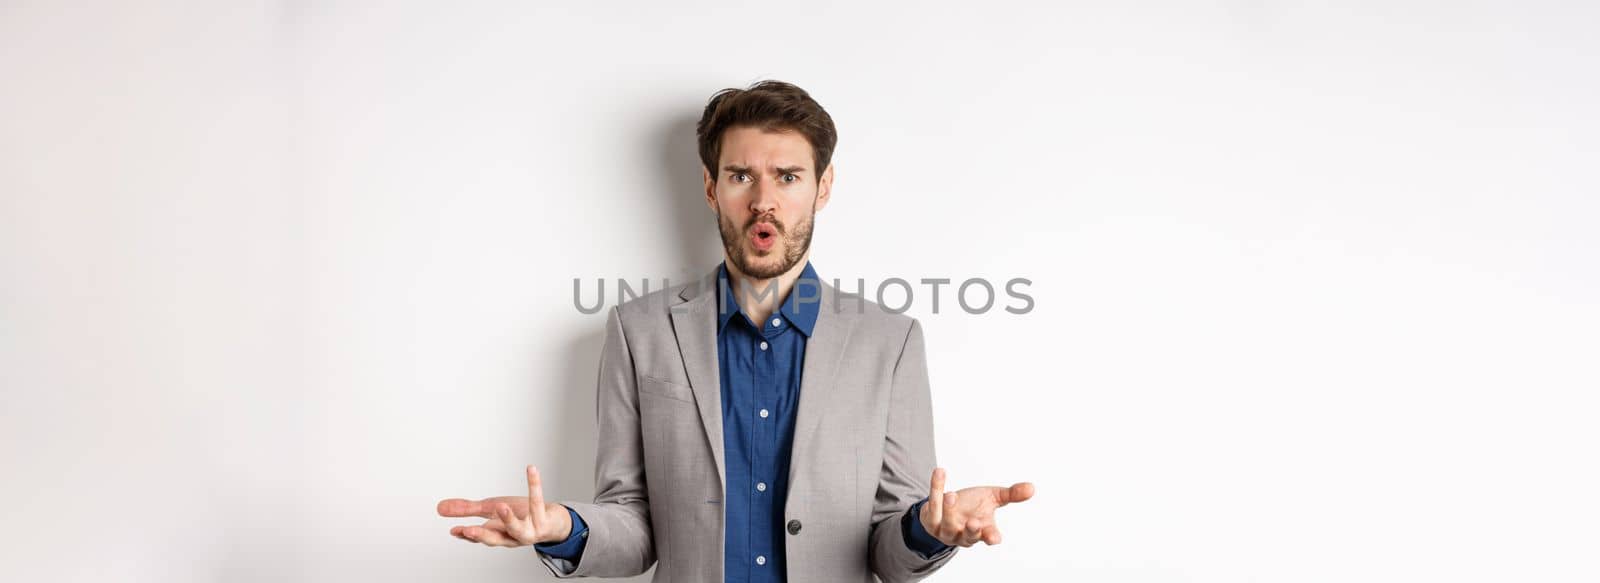 Confused and shocked businessman raising hands up and asking what happened, frowning disappointed, waiting for explanation, standing in suit on white background.